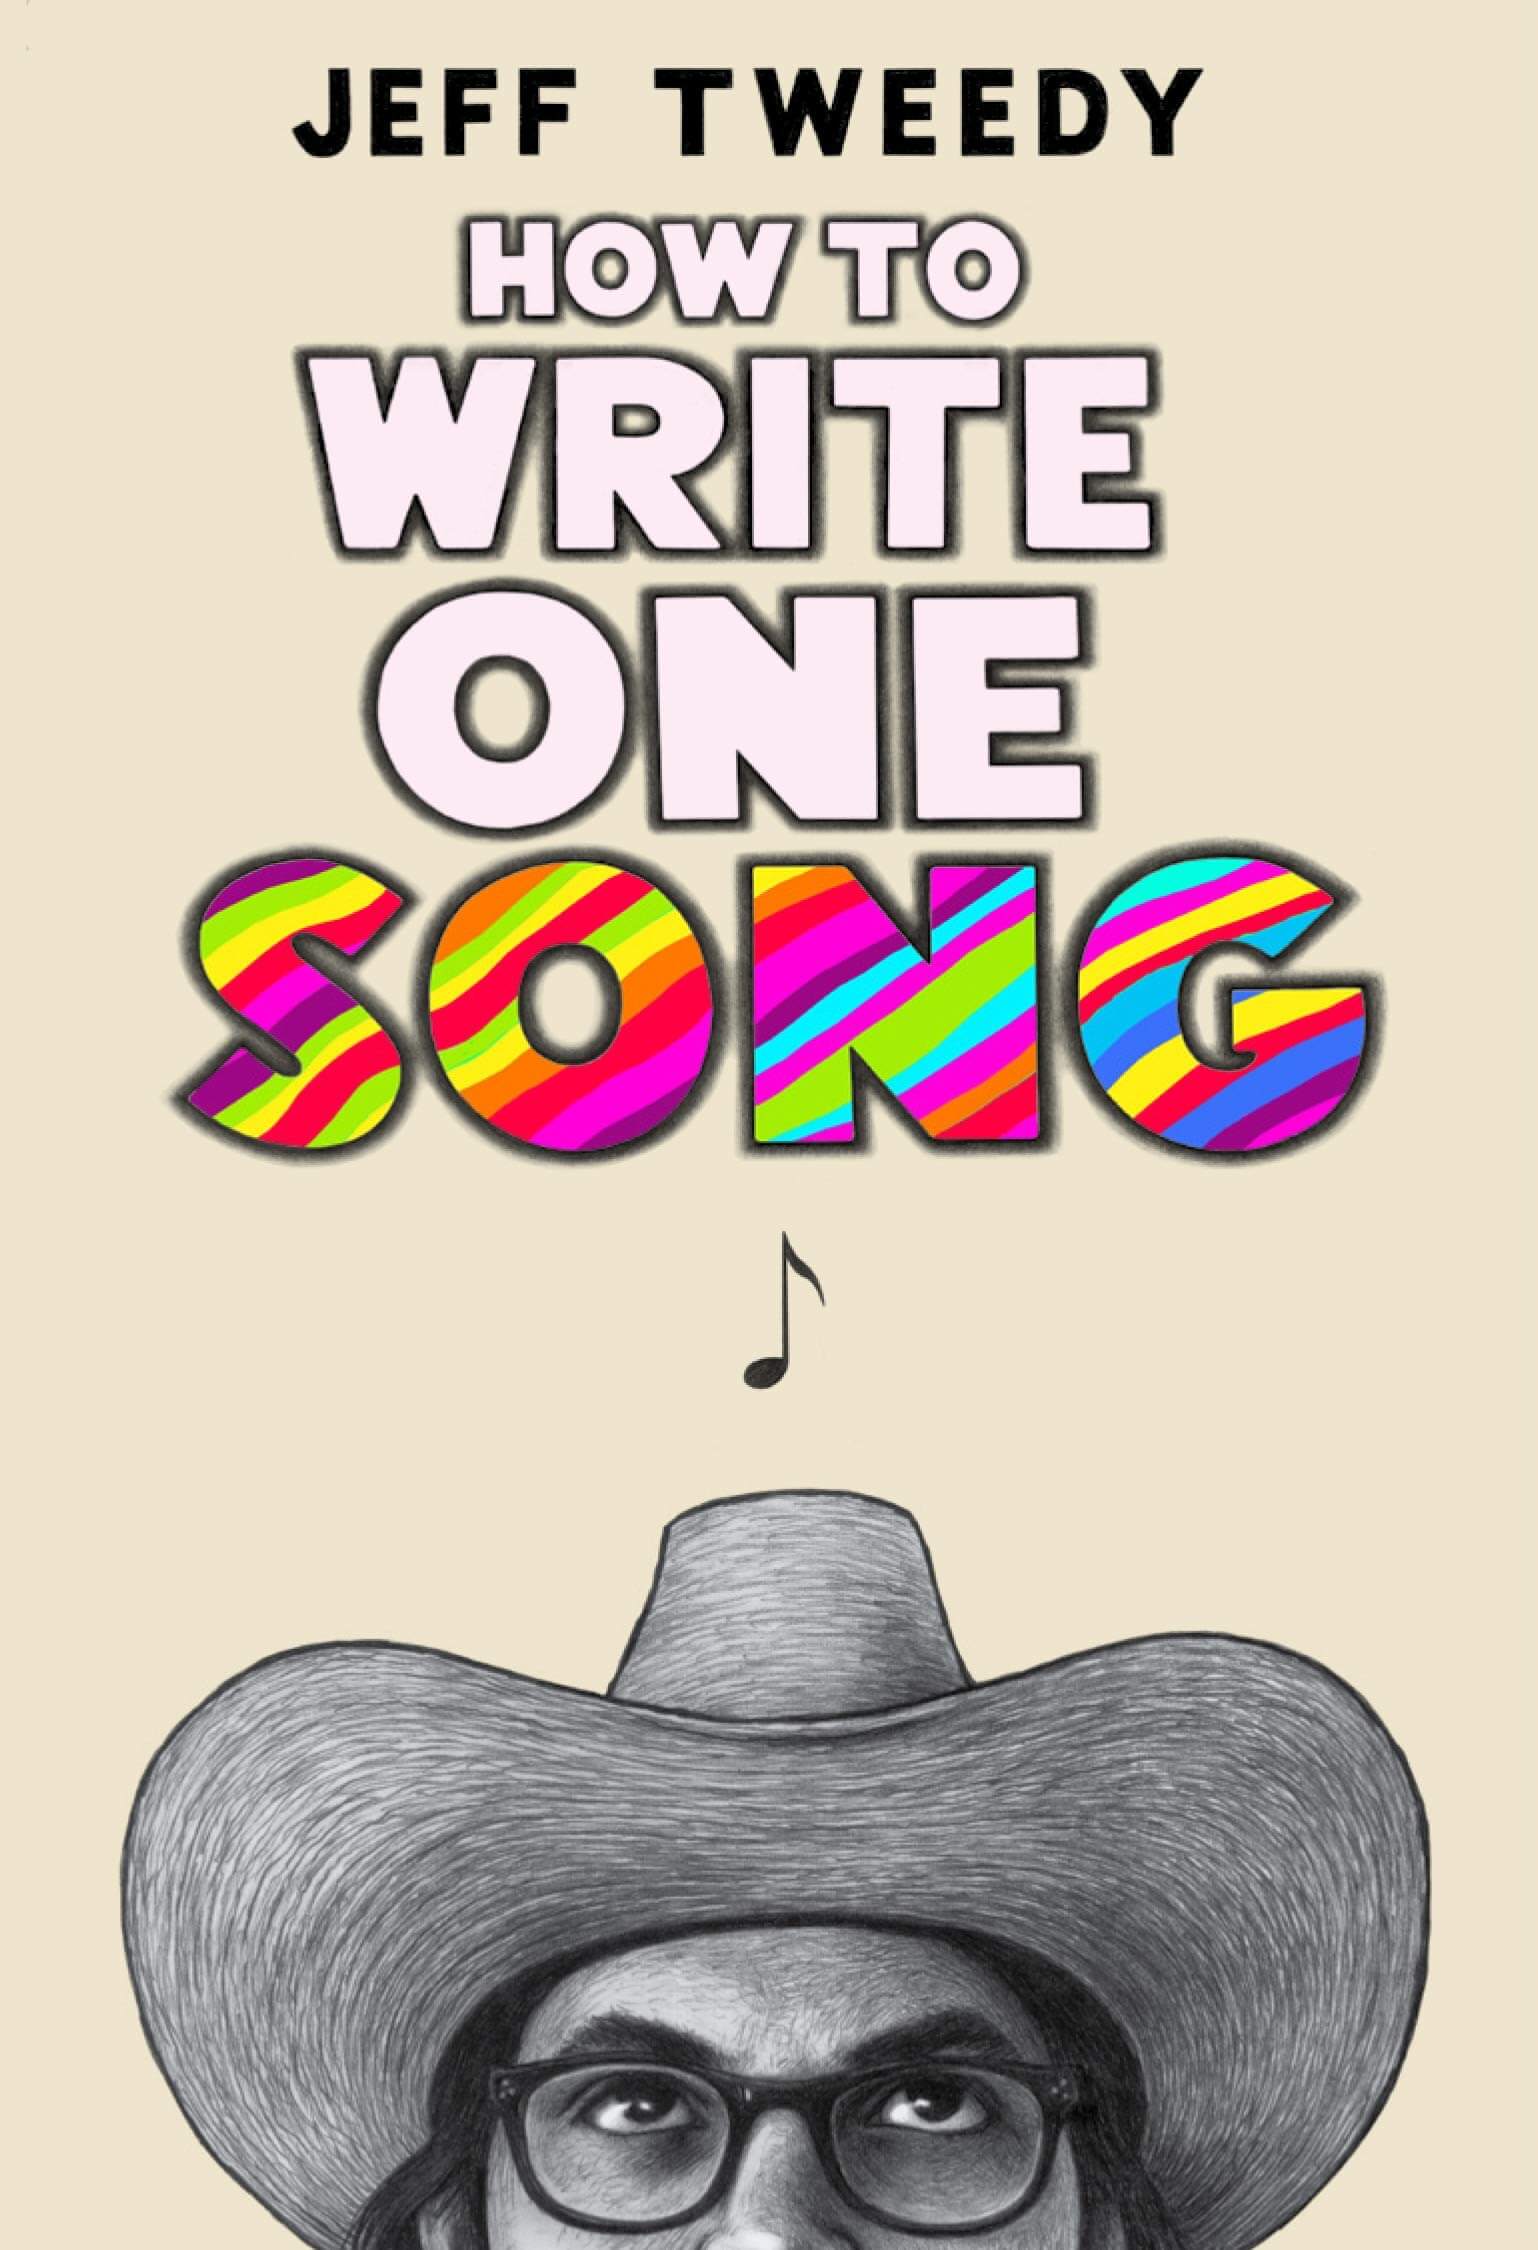 BOOK REVIEW: Jeff Tweedy ‘How to Write One Song’